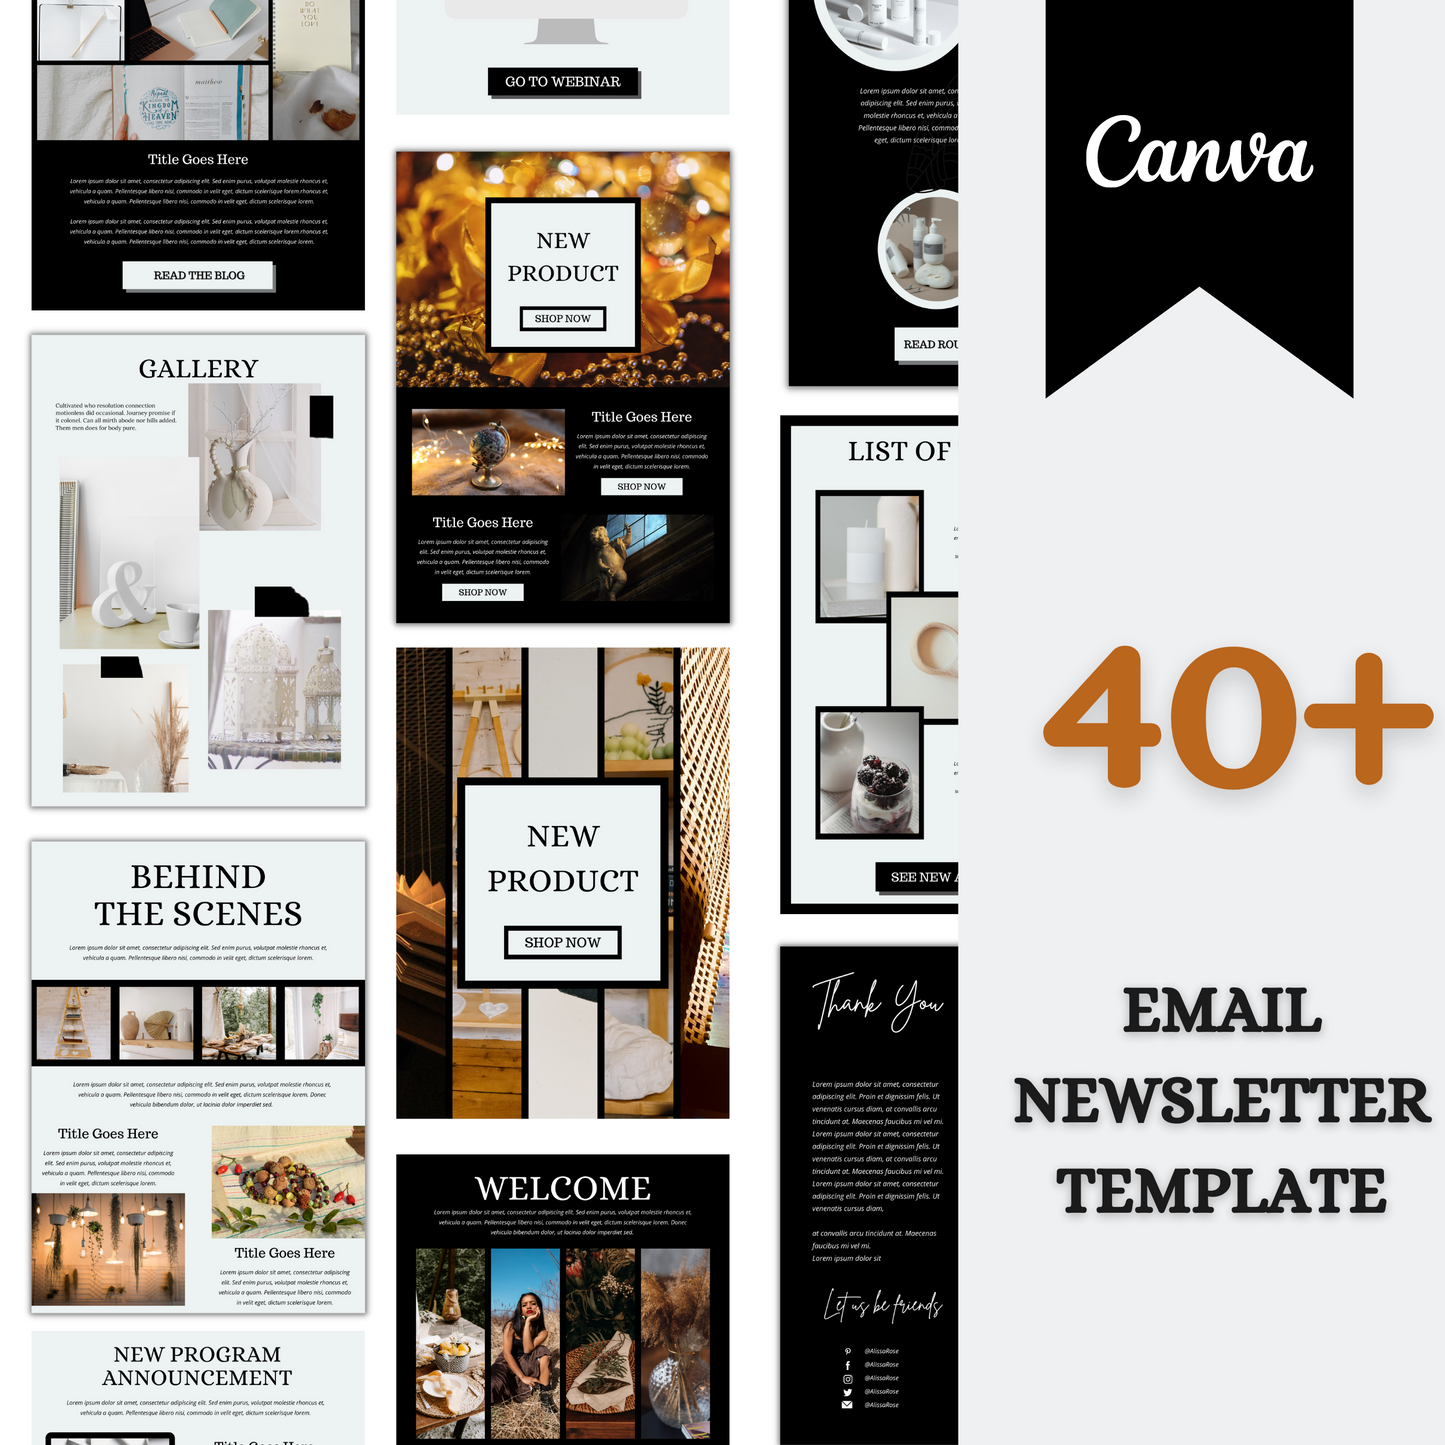 Email Newsletter template for Mailchimp, Email Marketing, online course, Email templates, email campaign, marketing small  business,coaching